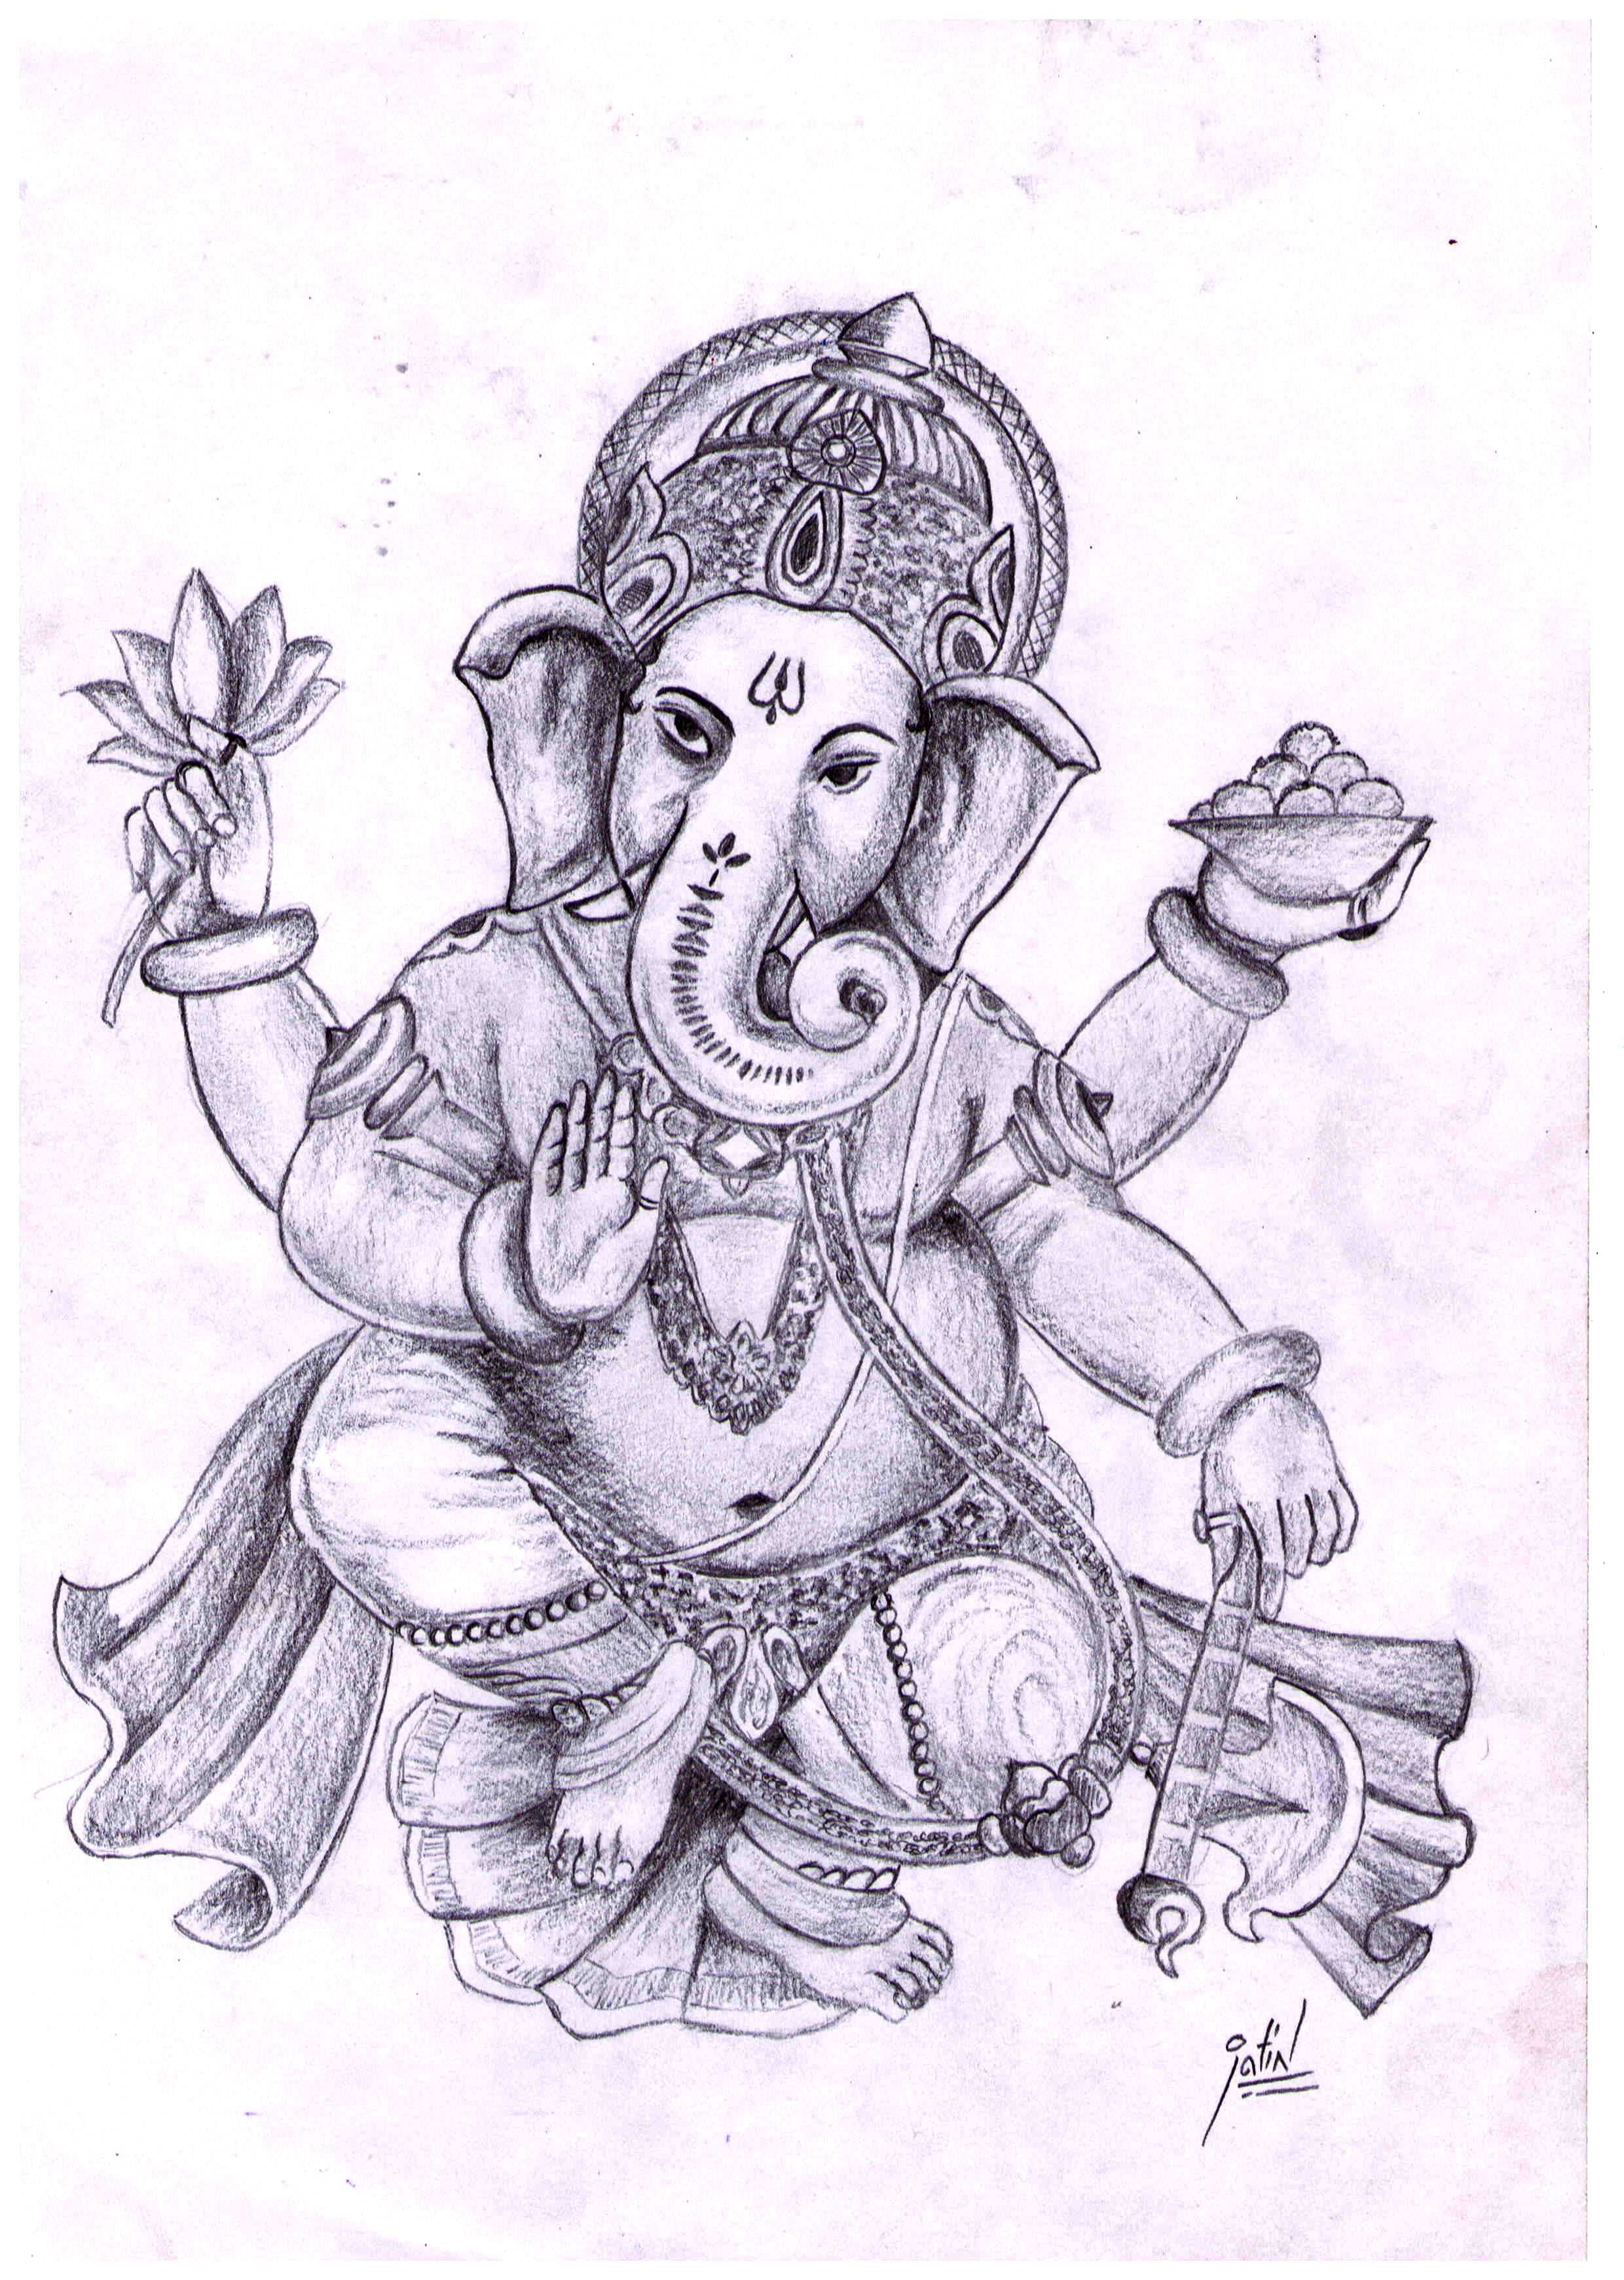 Free God Ganesh Drawings, Download Free Clip Art, Free Clip Art on Clipart ...